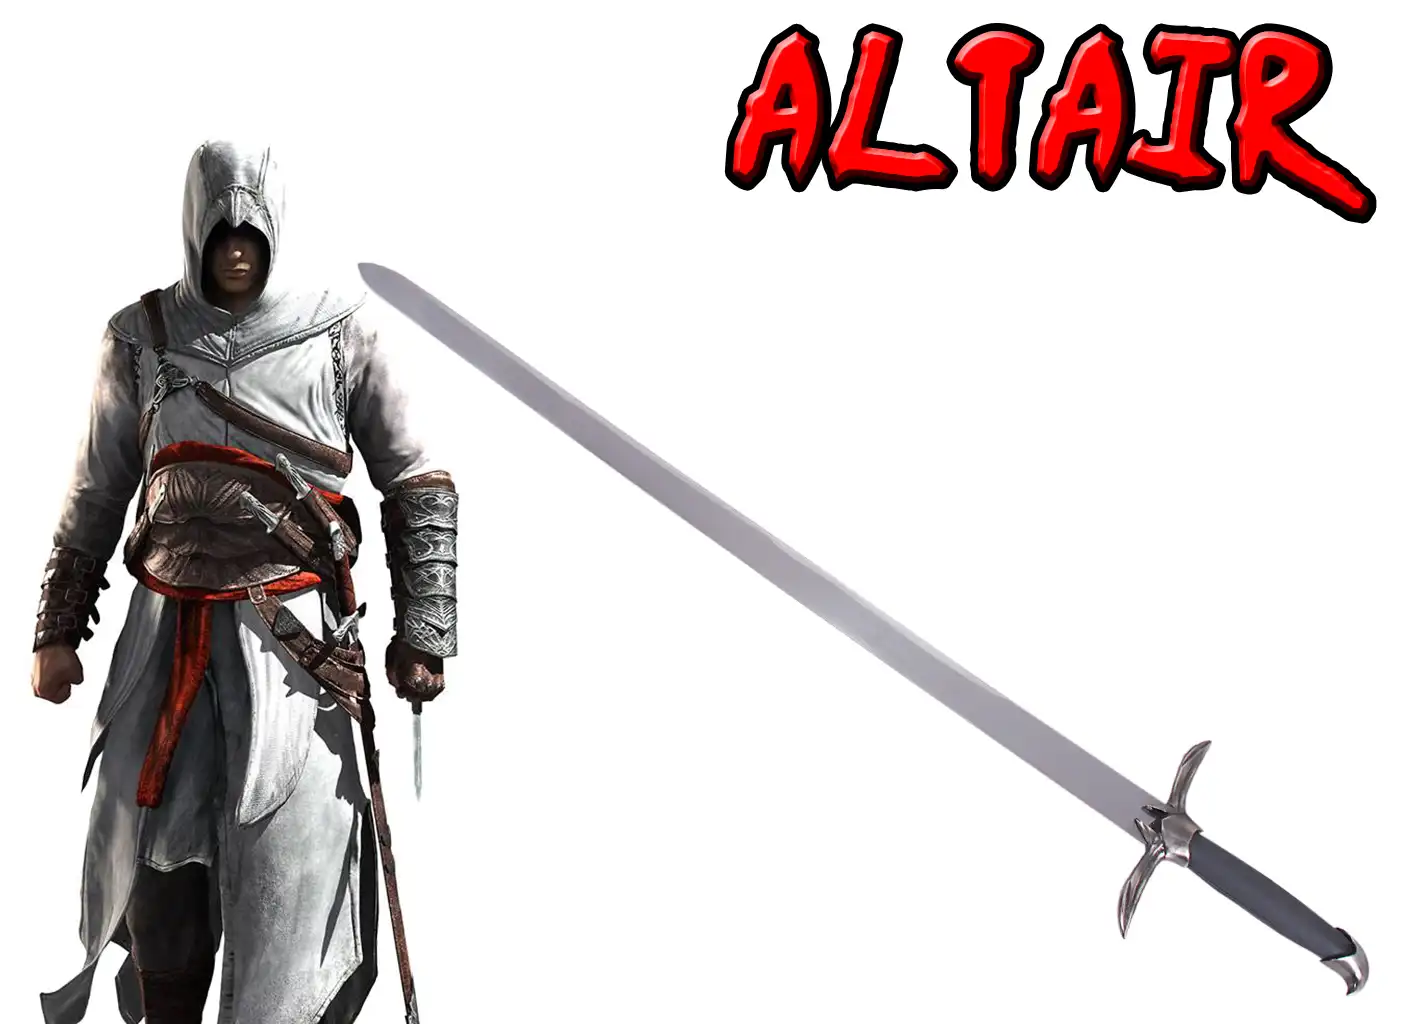 altair dans assassin's creed